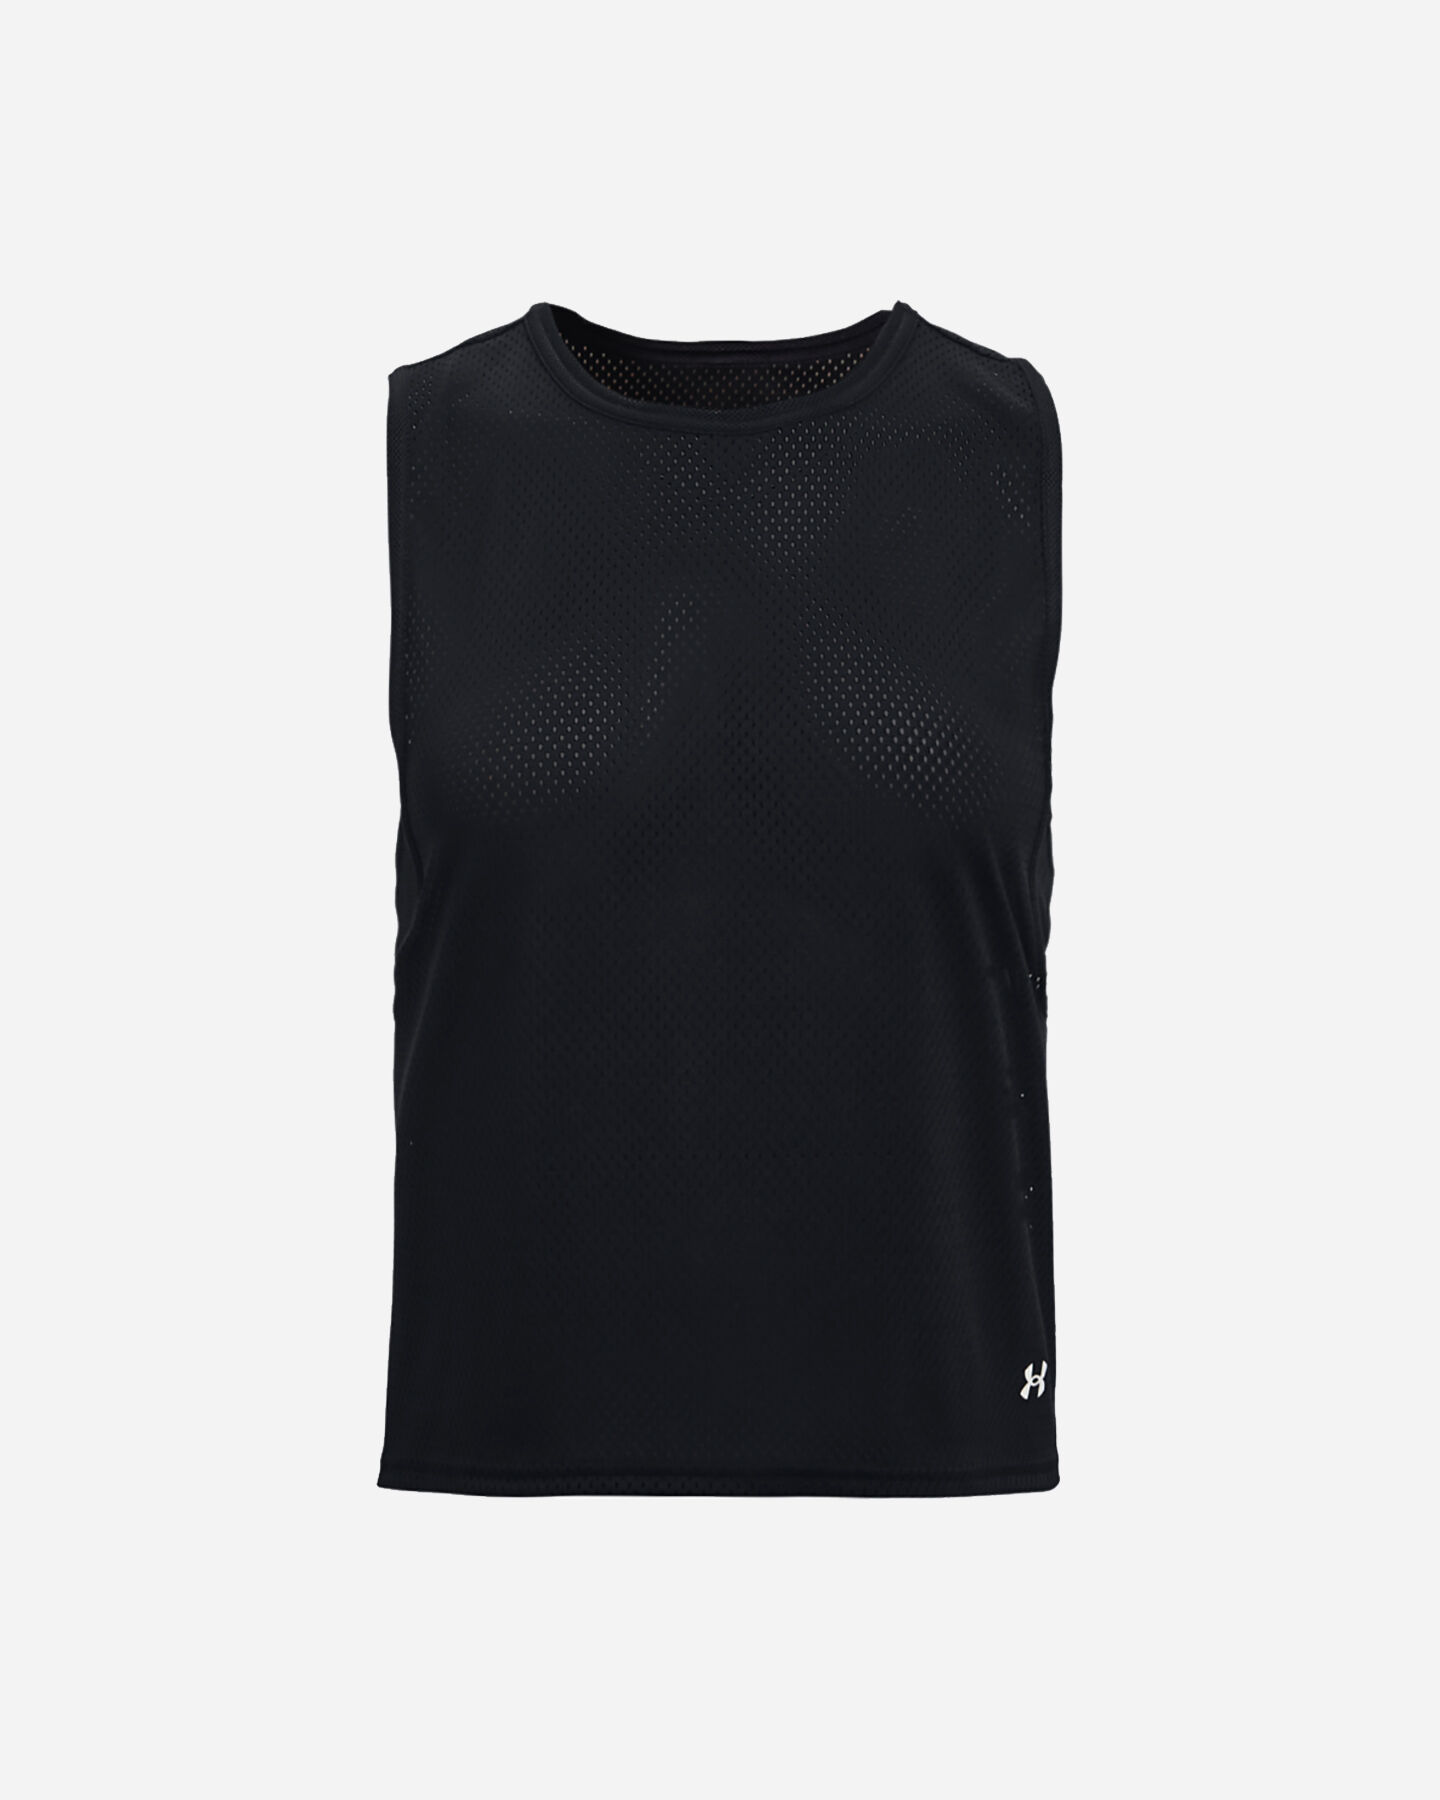  Canotta training UNDER ARMOUR MUSCLE MESH W S5286947|0001|XS scatto 0